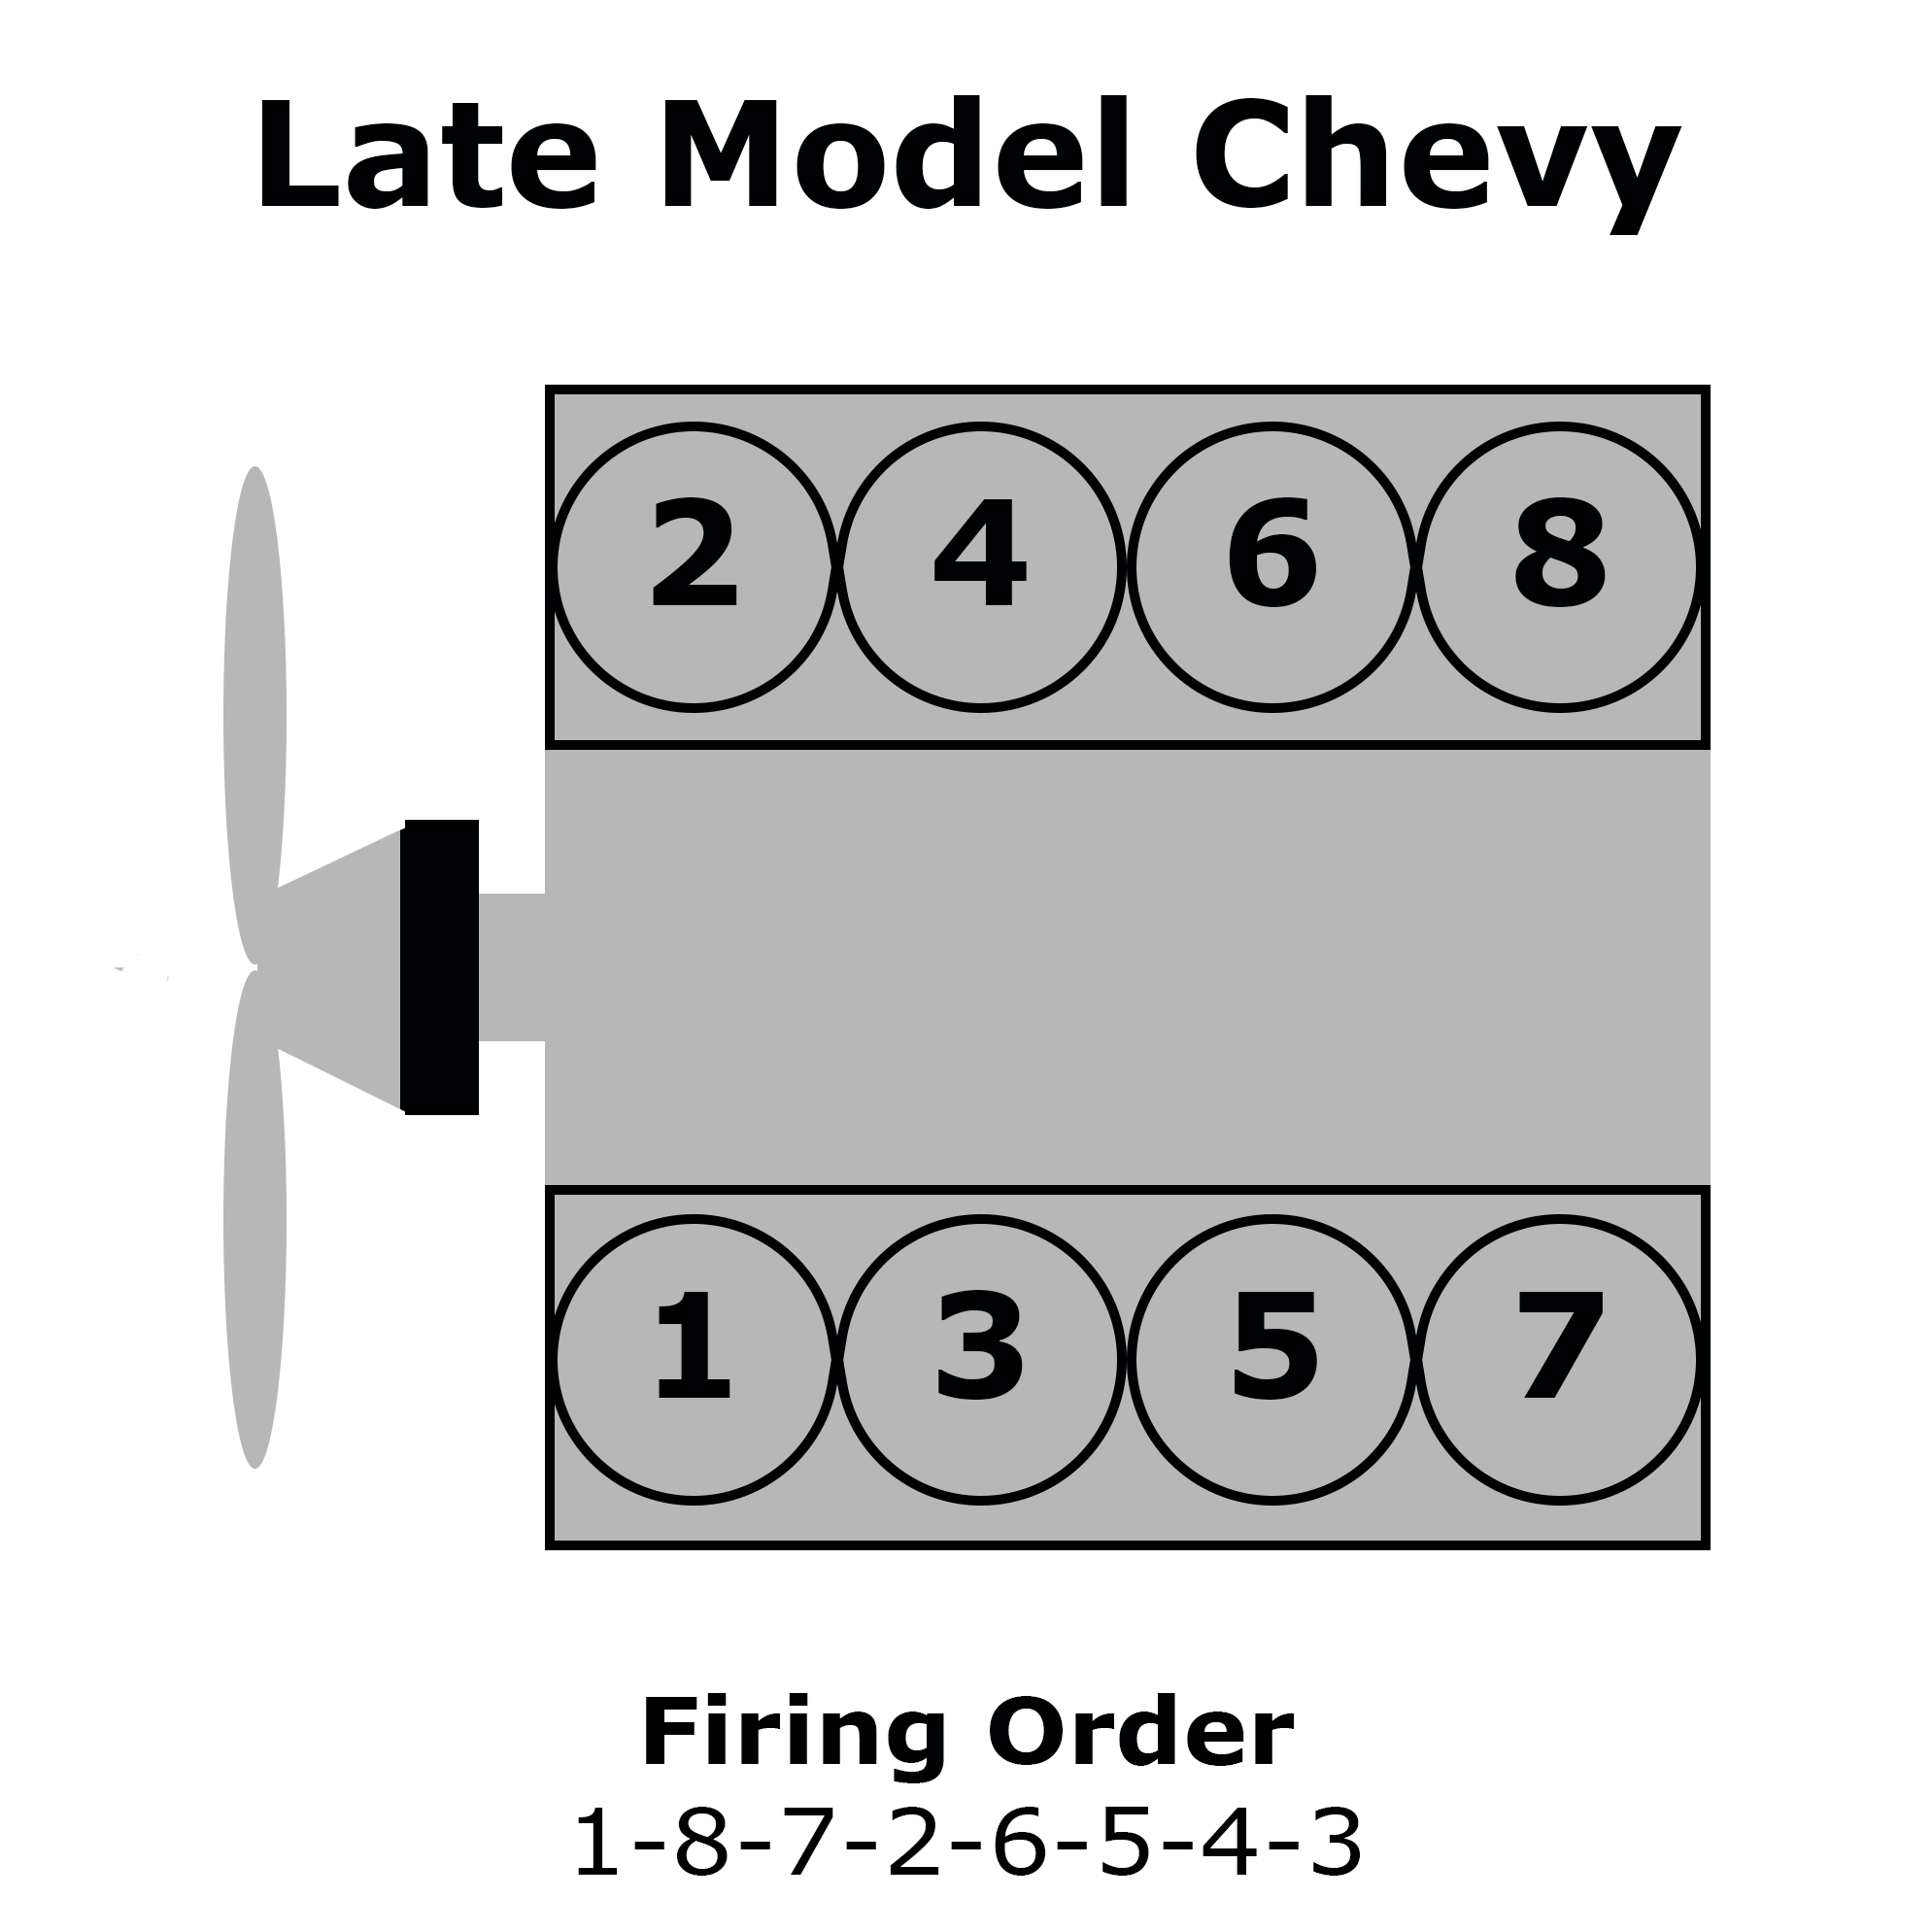 Late Model Chevy Cylinder Numbering and Firing Order